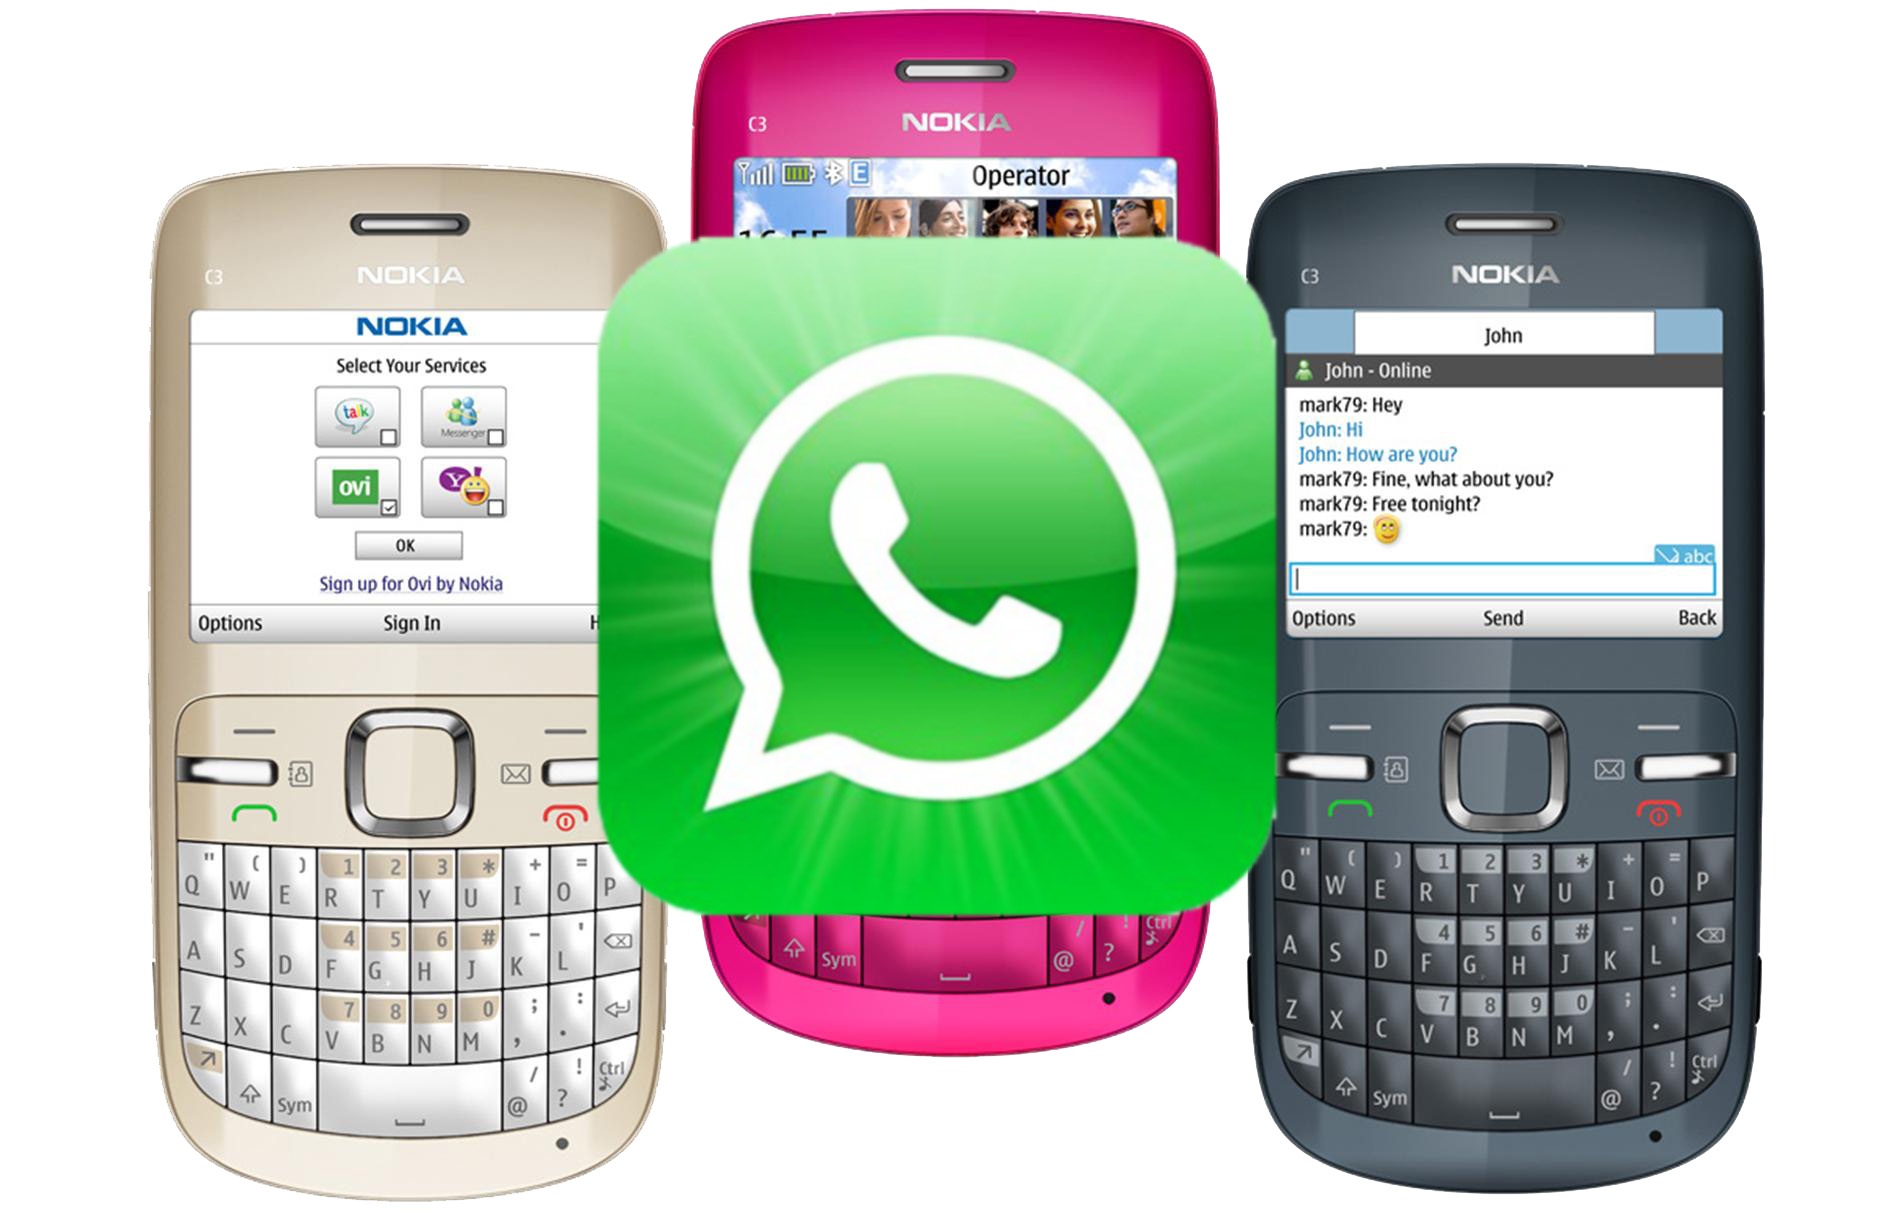 WhatsApp will end its App support for Nokia S40, and Nokia Symbian S60